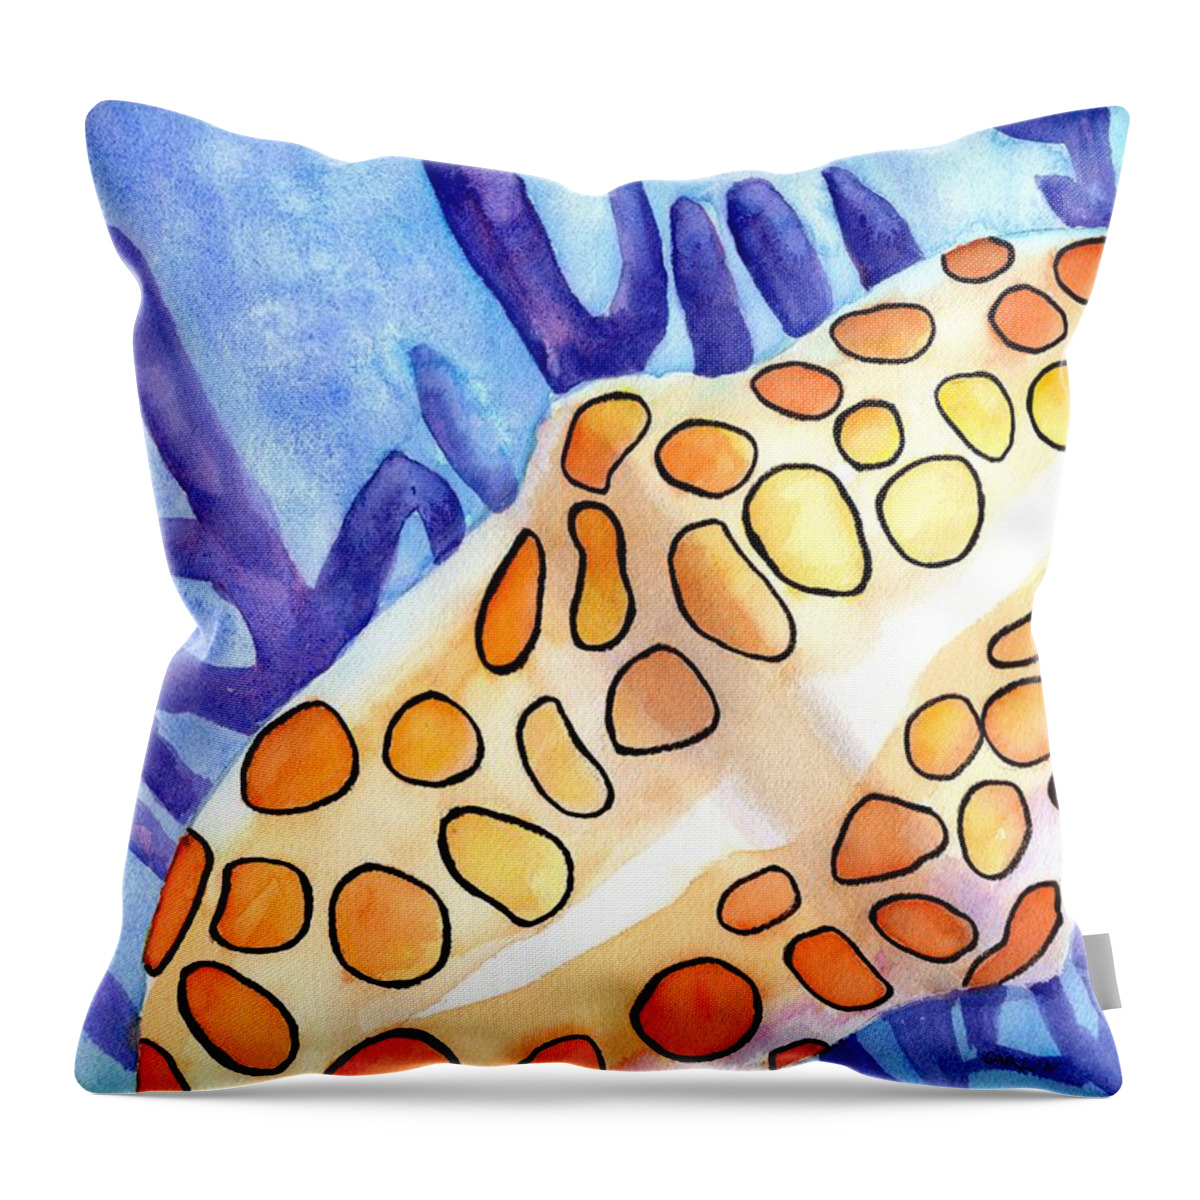 Seashell Throw Pillow featuring the painting Flamingo Tongue Snail Shell by Carlin Blahnik CarlinArtWatercolor